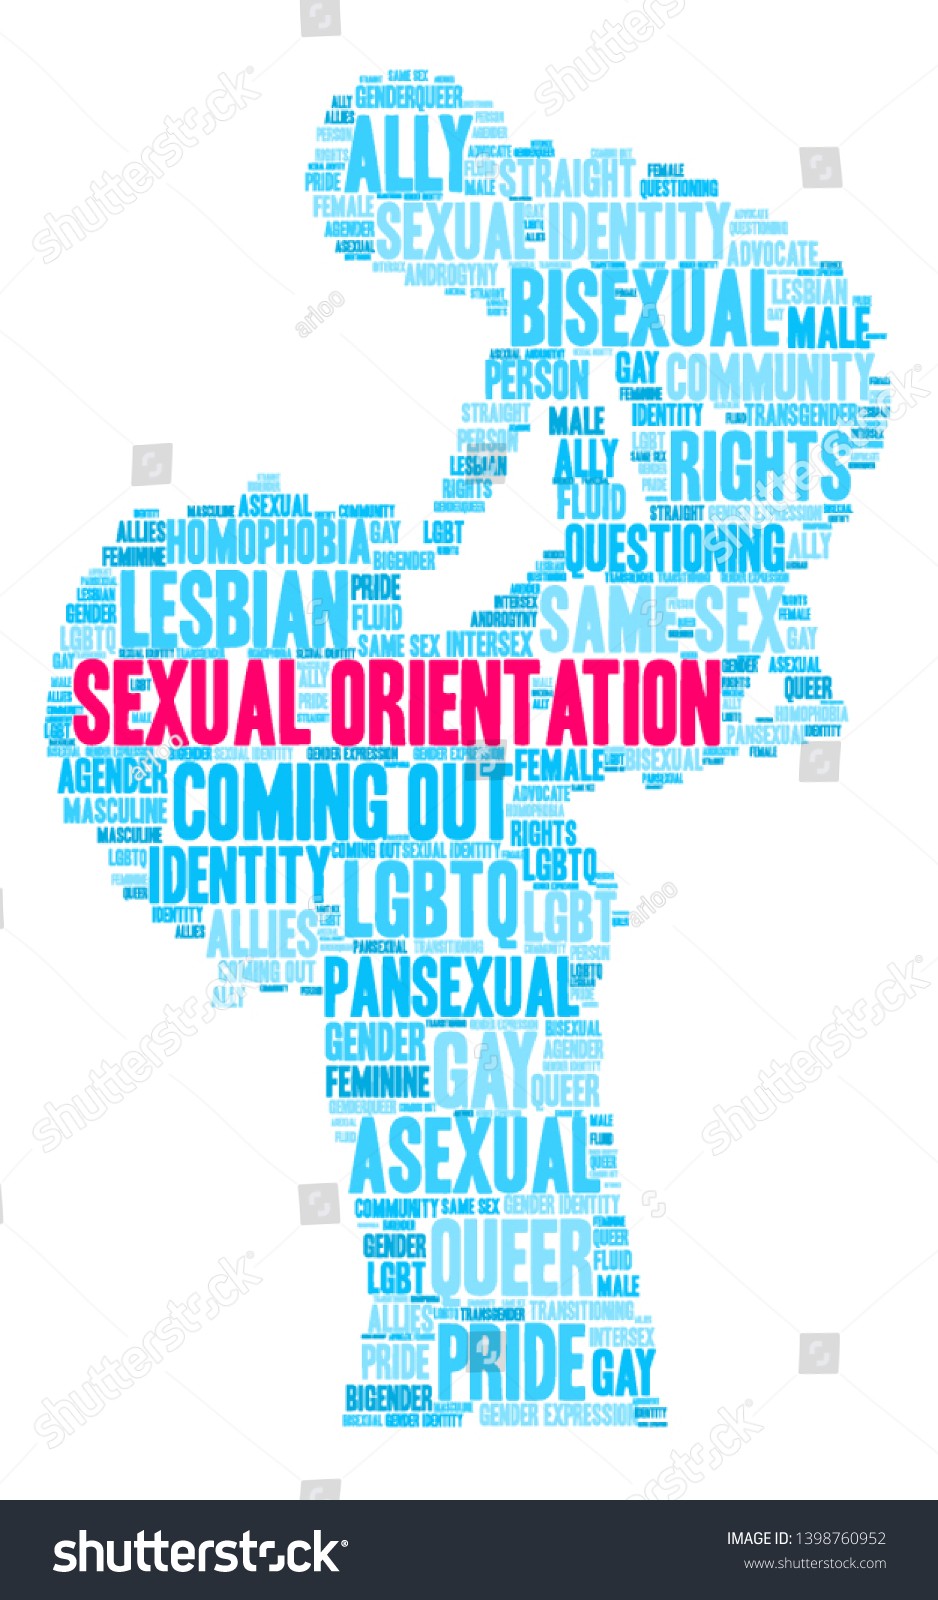 Sexual Orientation Word Cloud On A White Royalty Free Stock Vector 1398760952 5337